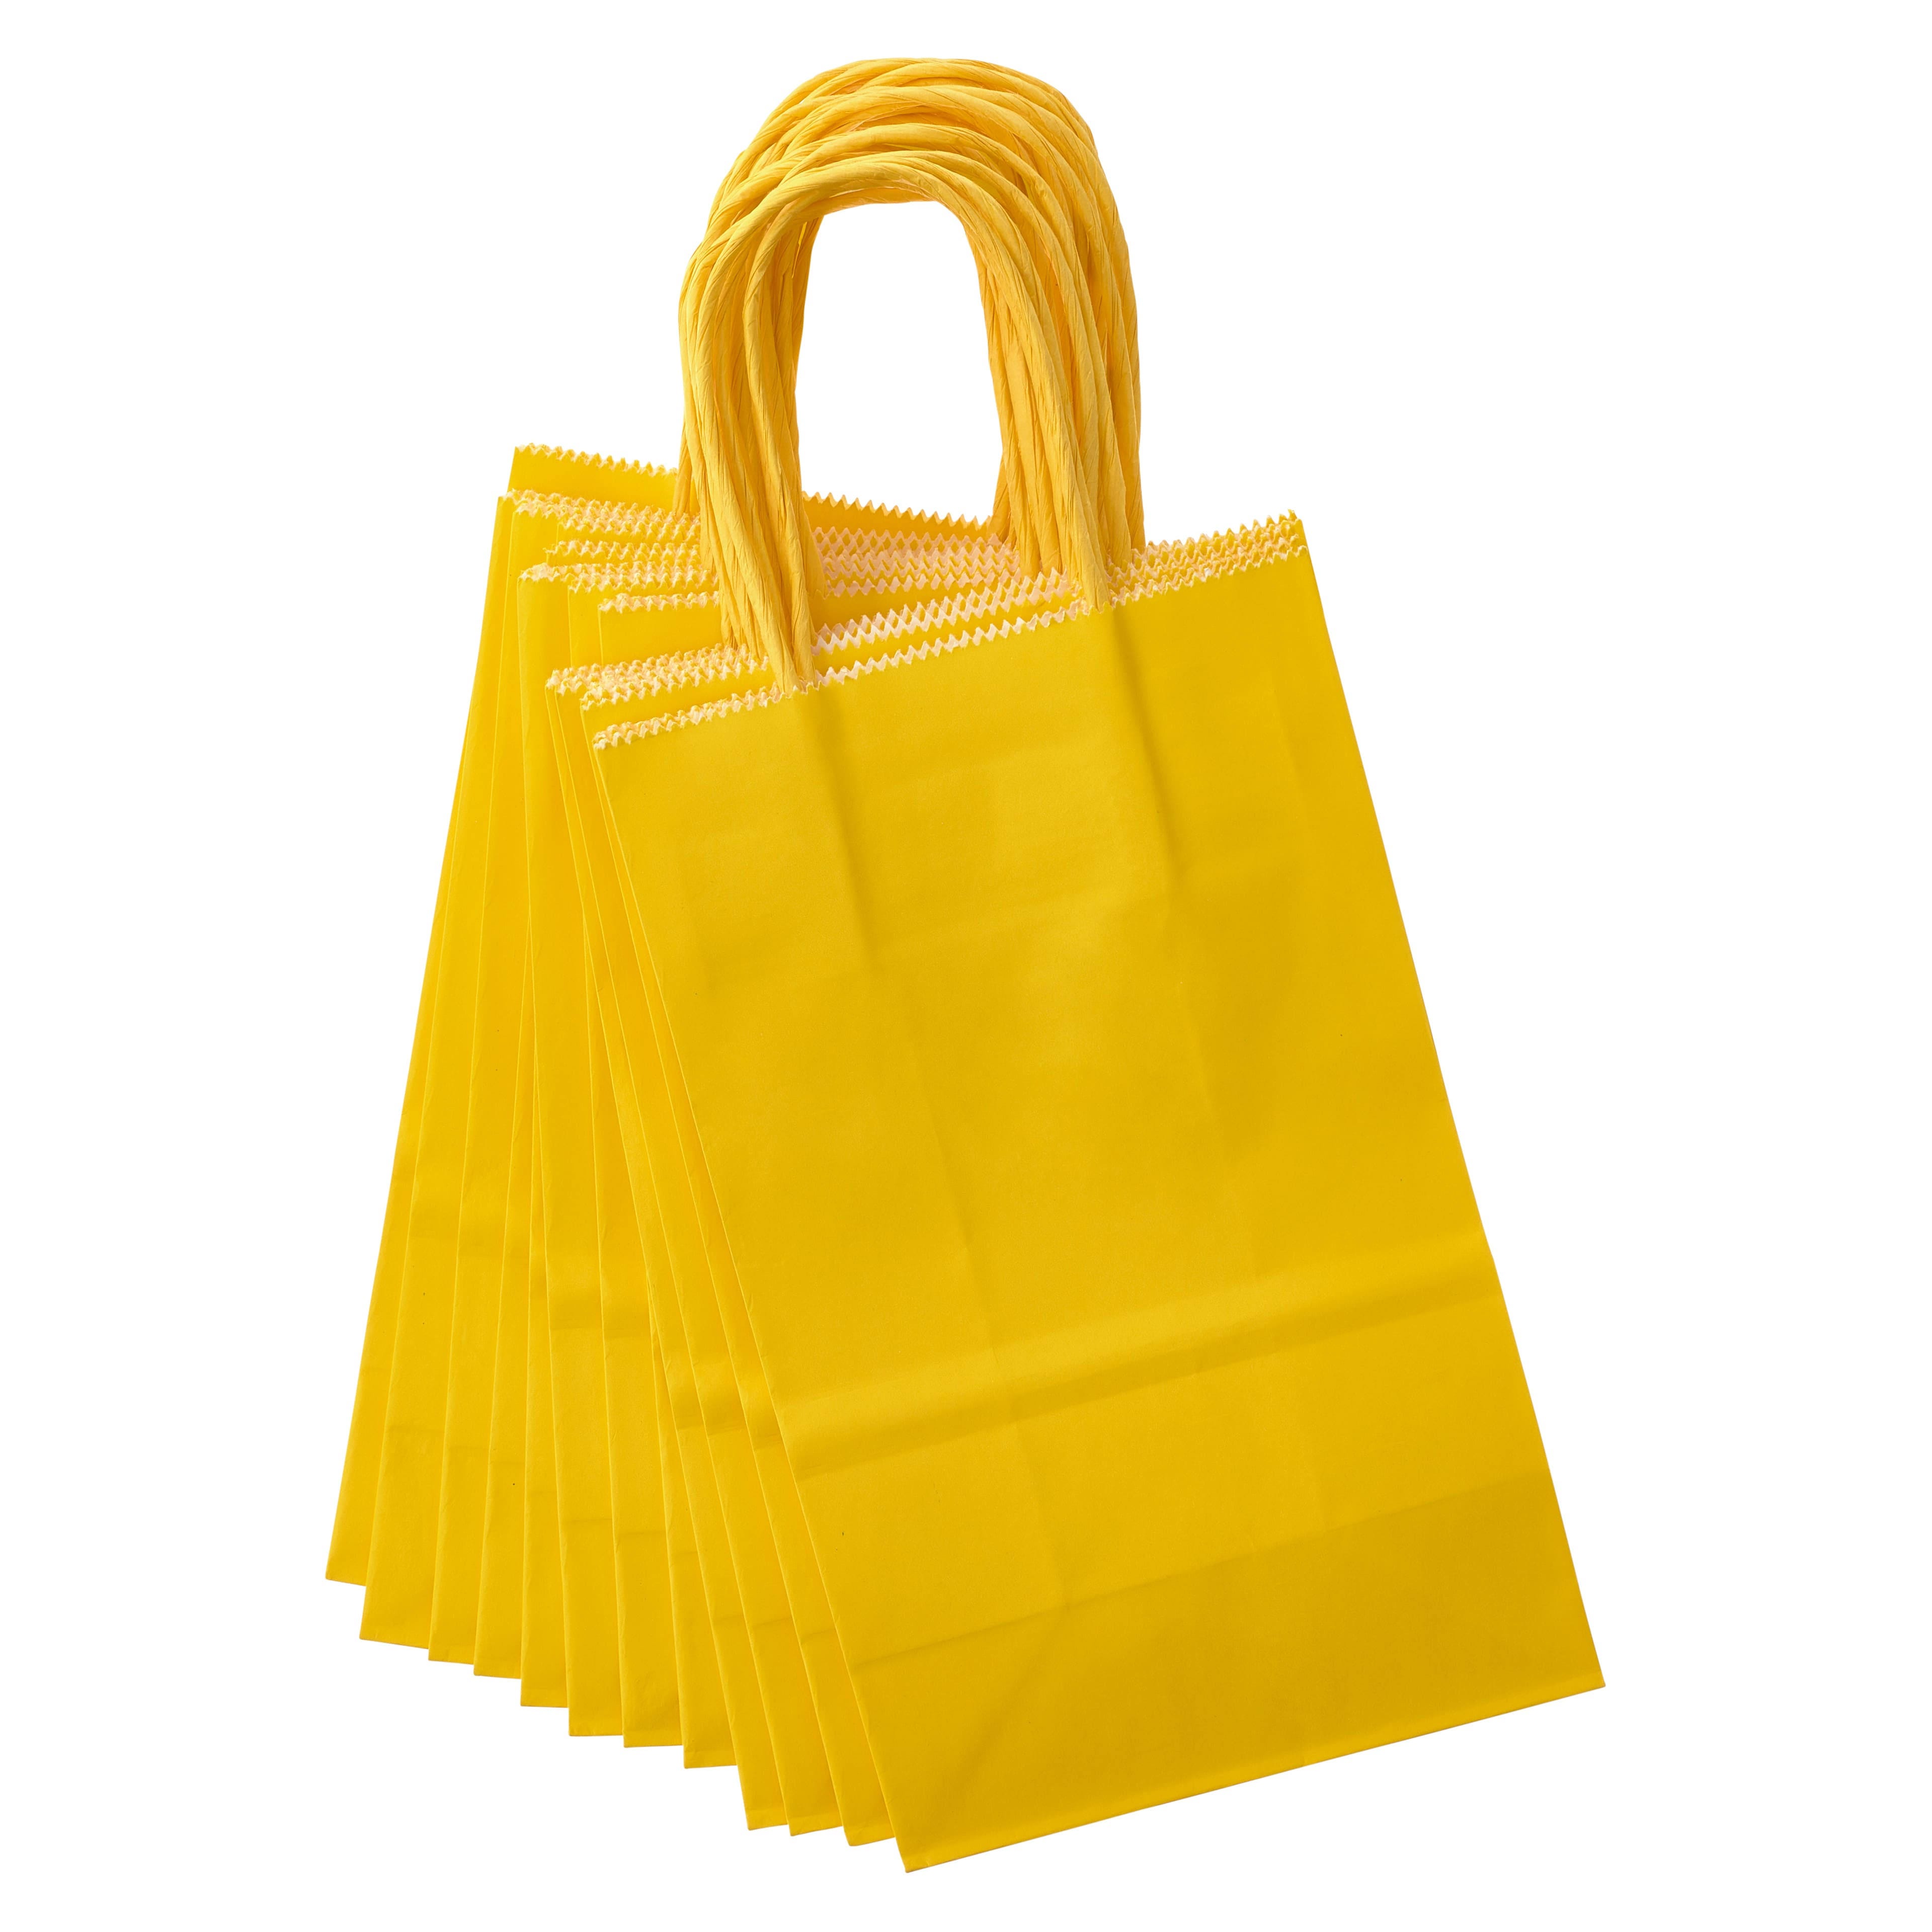 Celebrate It's Yellow Paper Bag Value Pack | Image